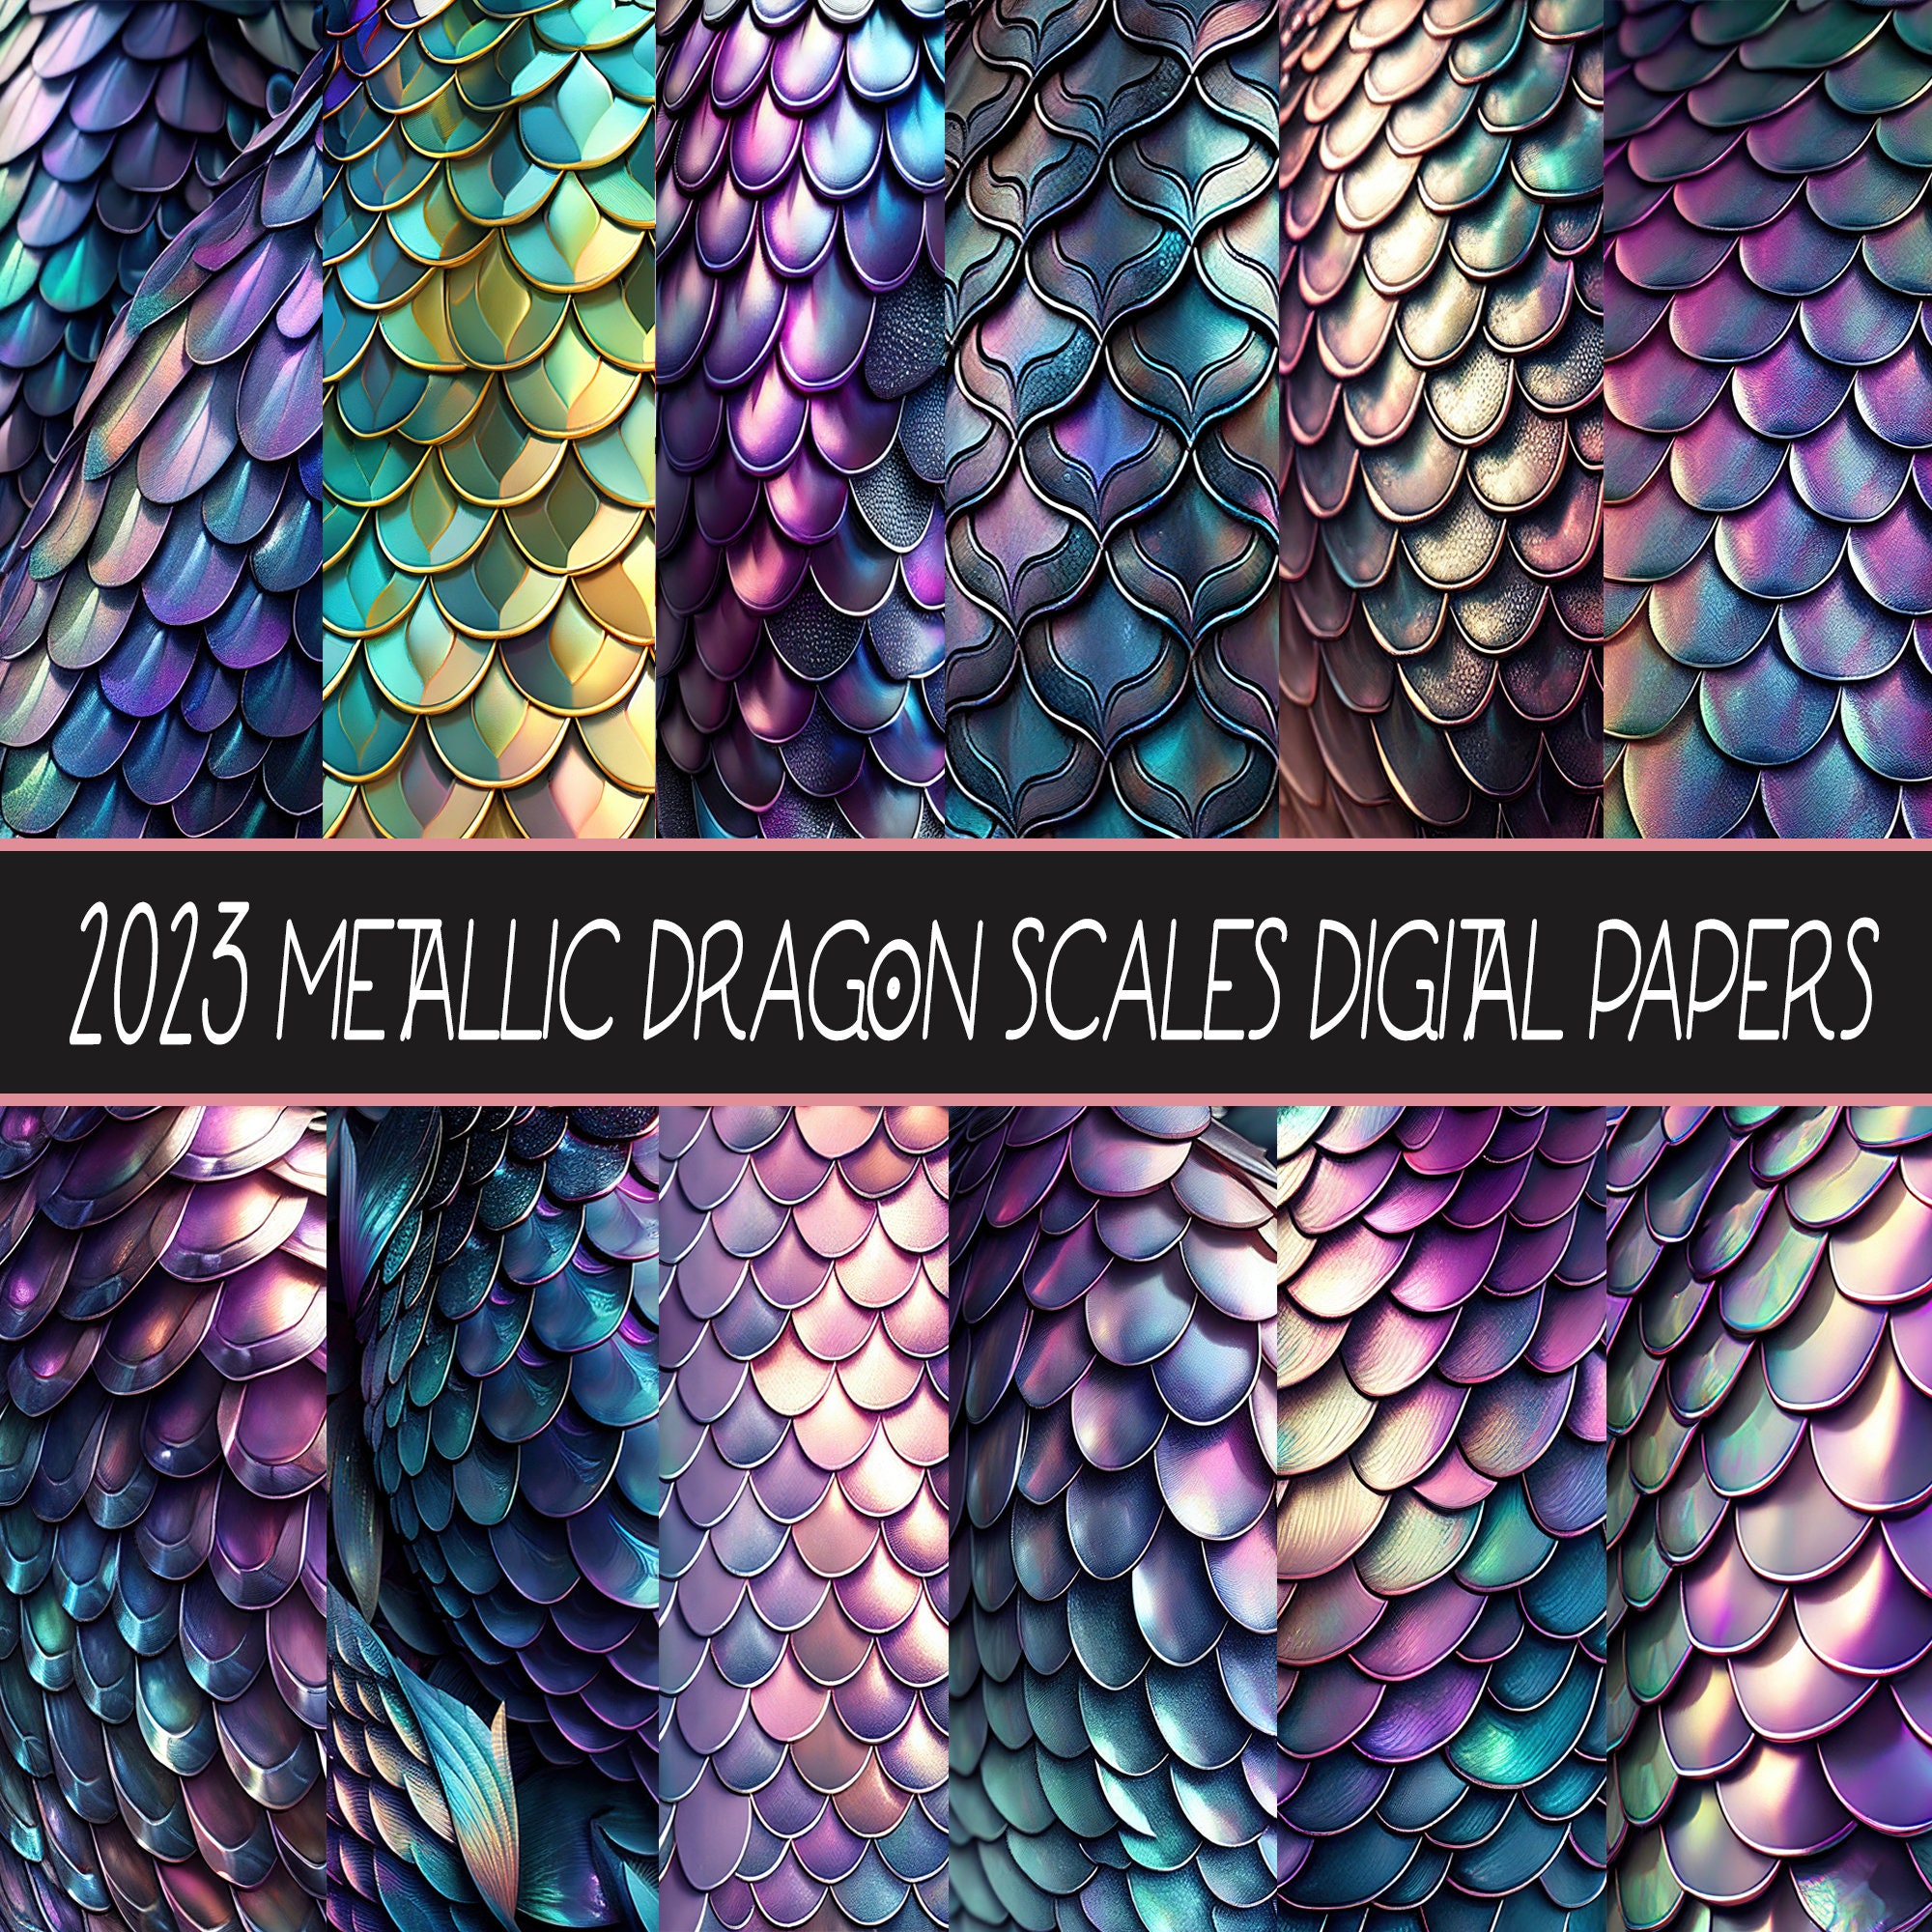 Metallic Dragon Scales Skin Mythical Gothic Digital Papers